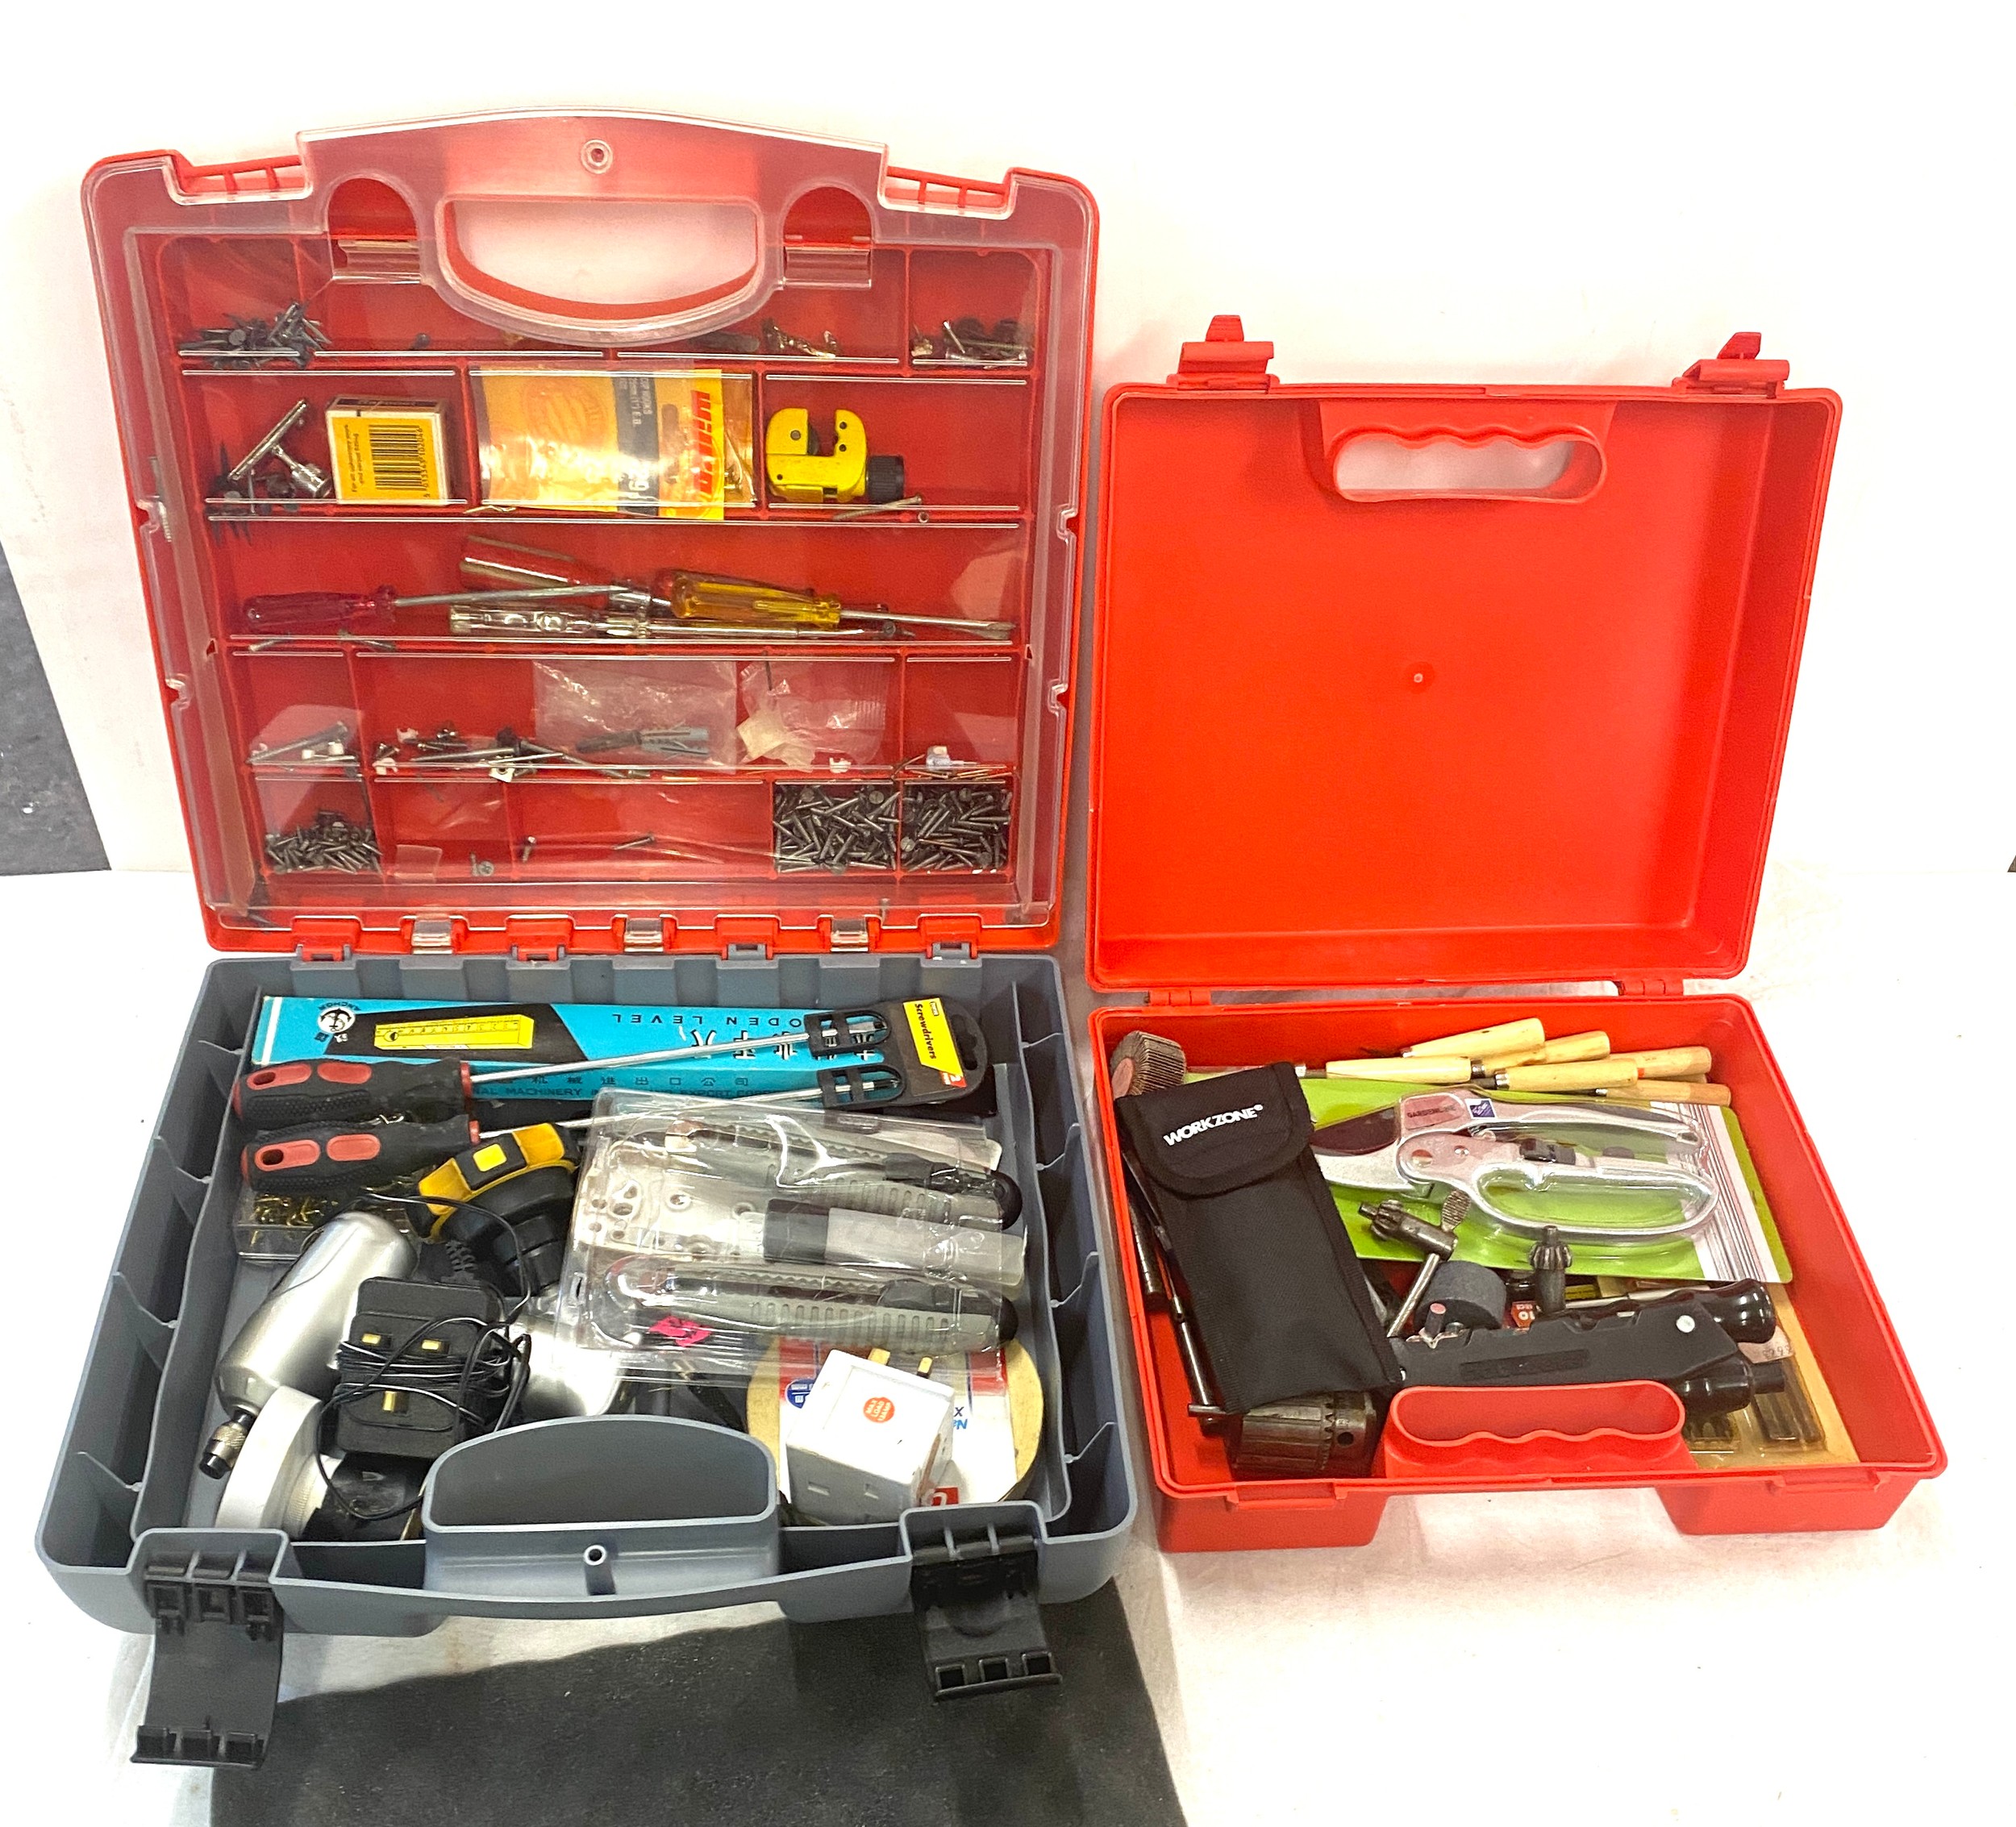 2 Plastic tool boxes with various tools